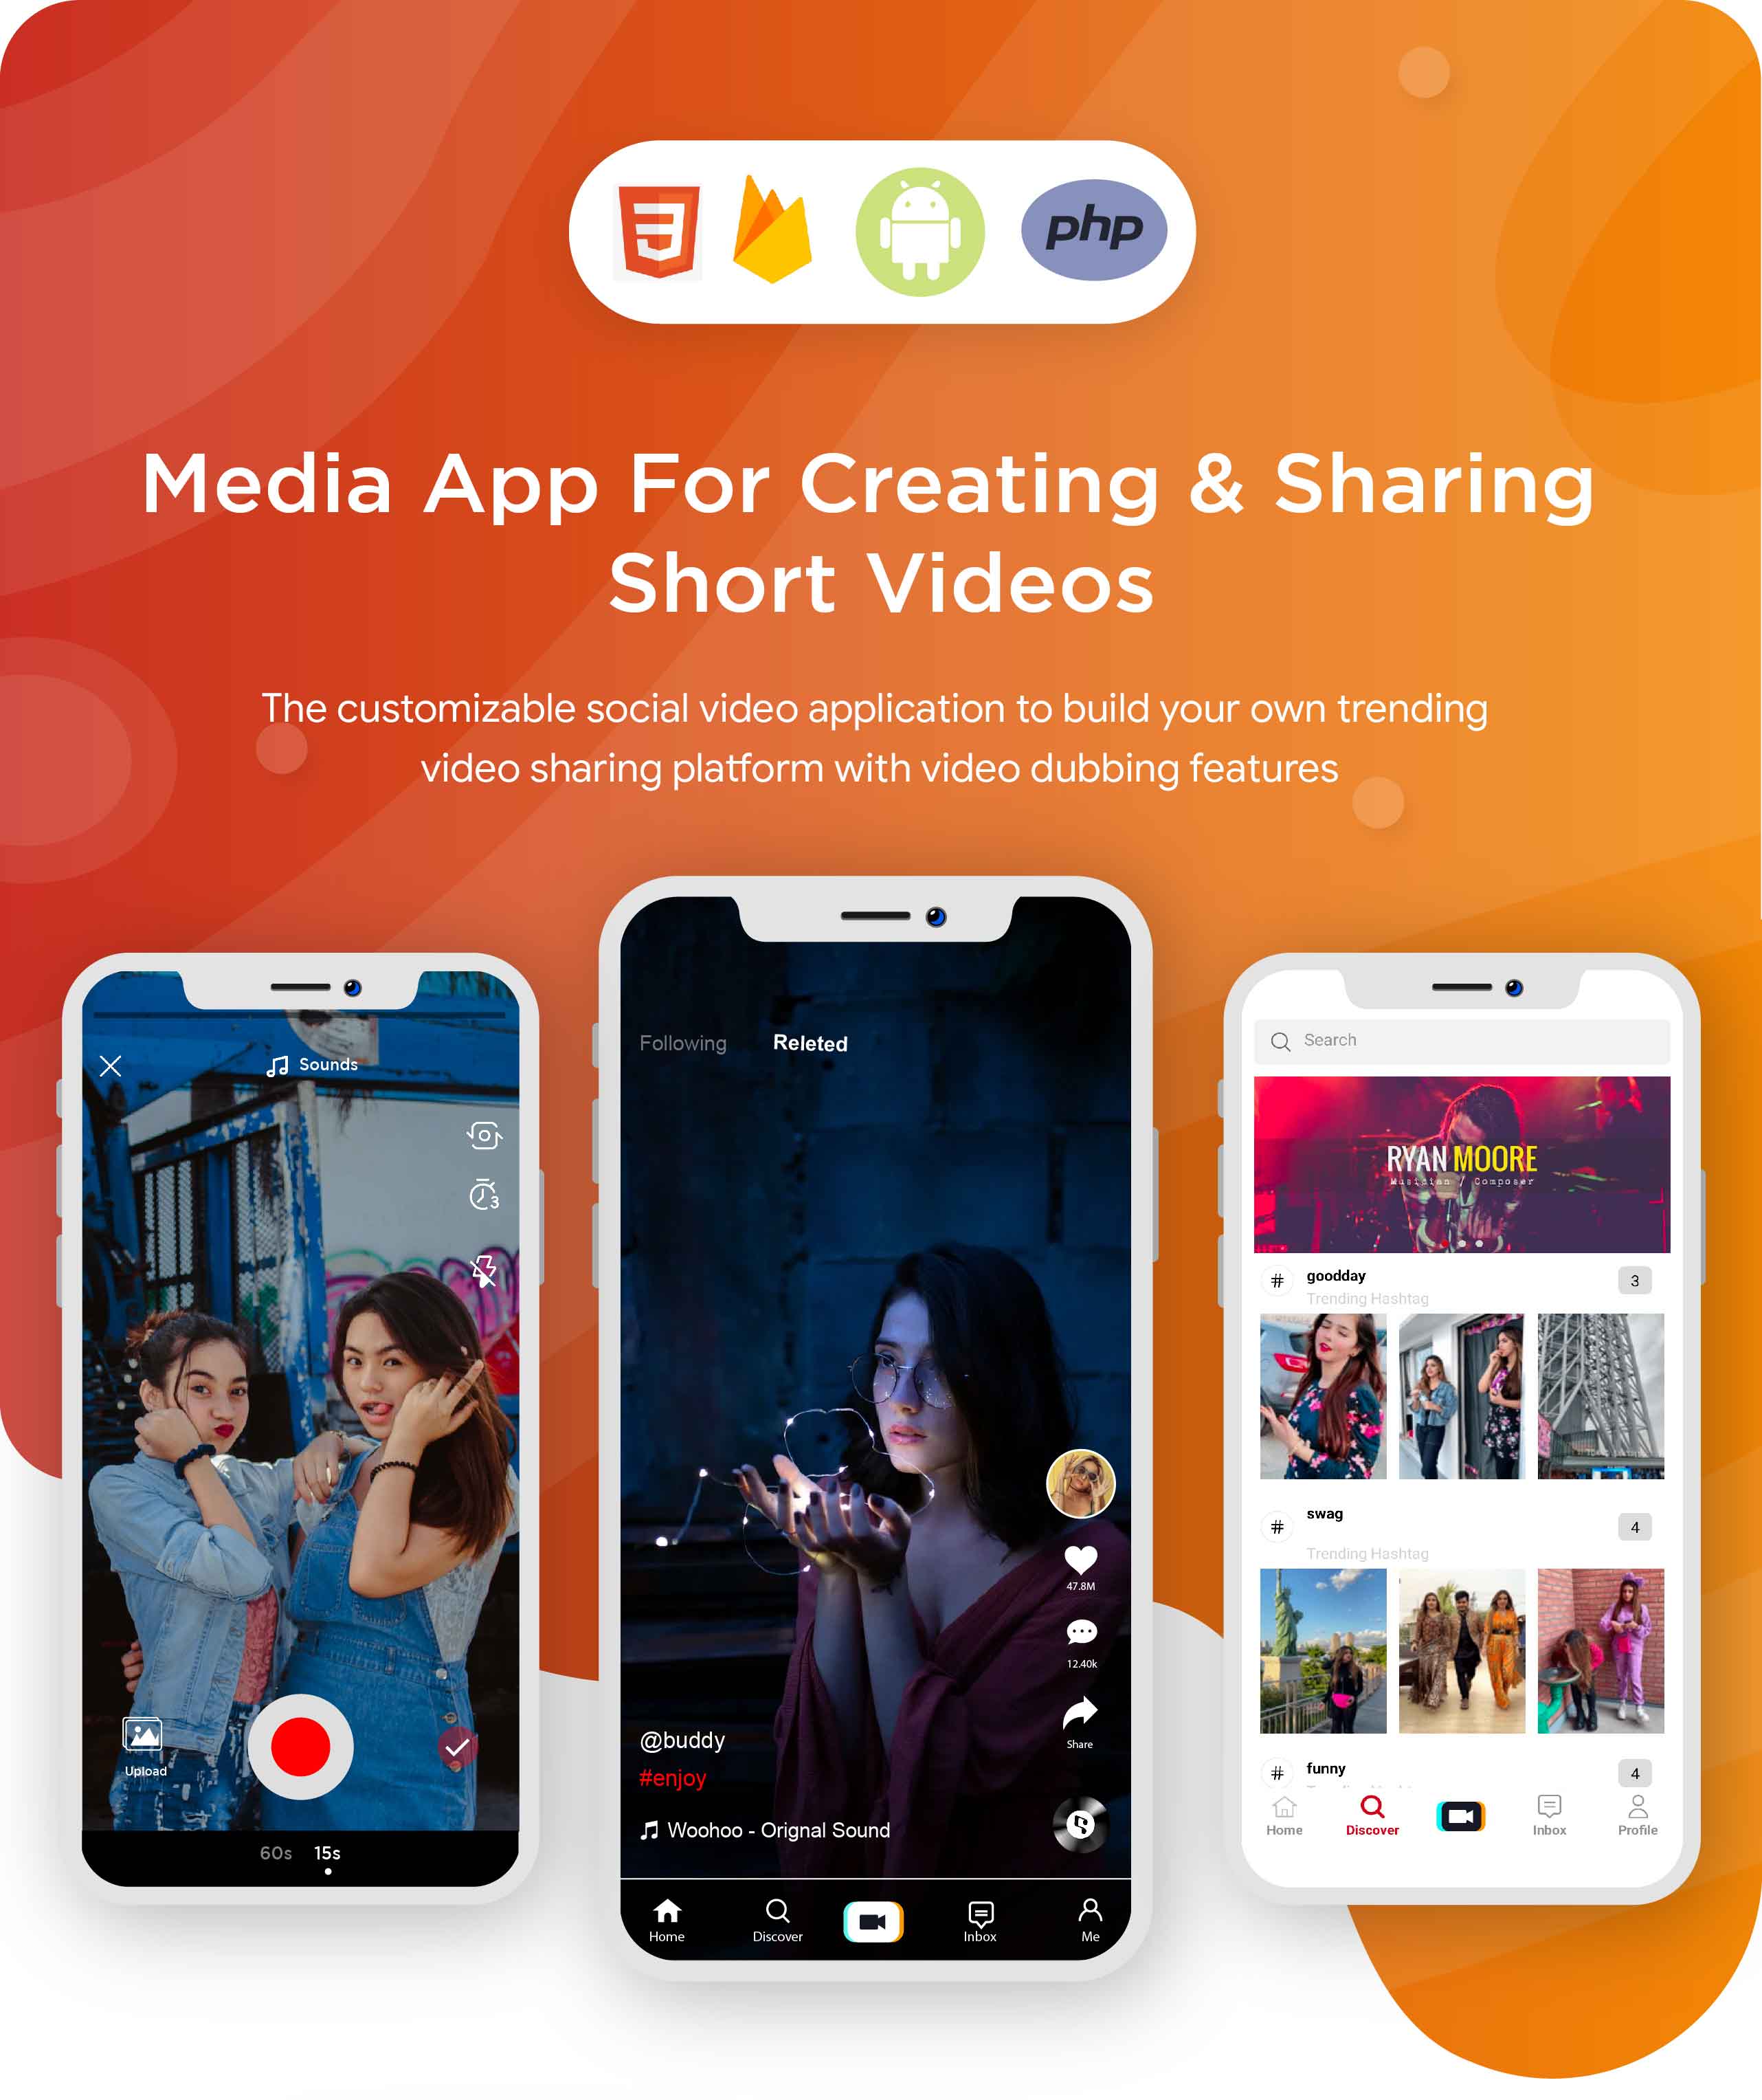 TicTic - Android media app for creating and sharing short videos - 13